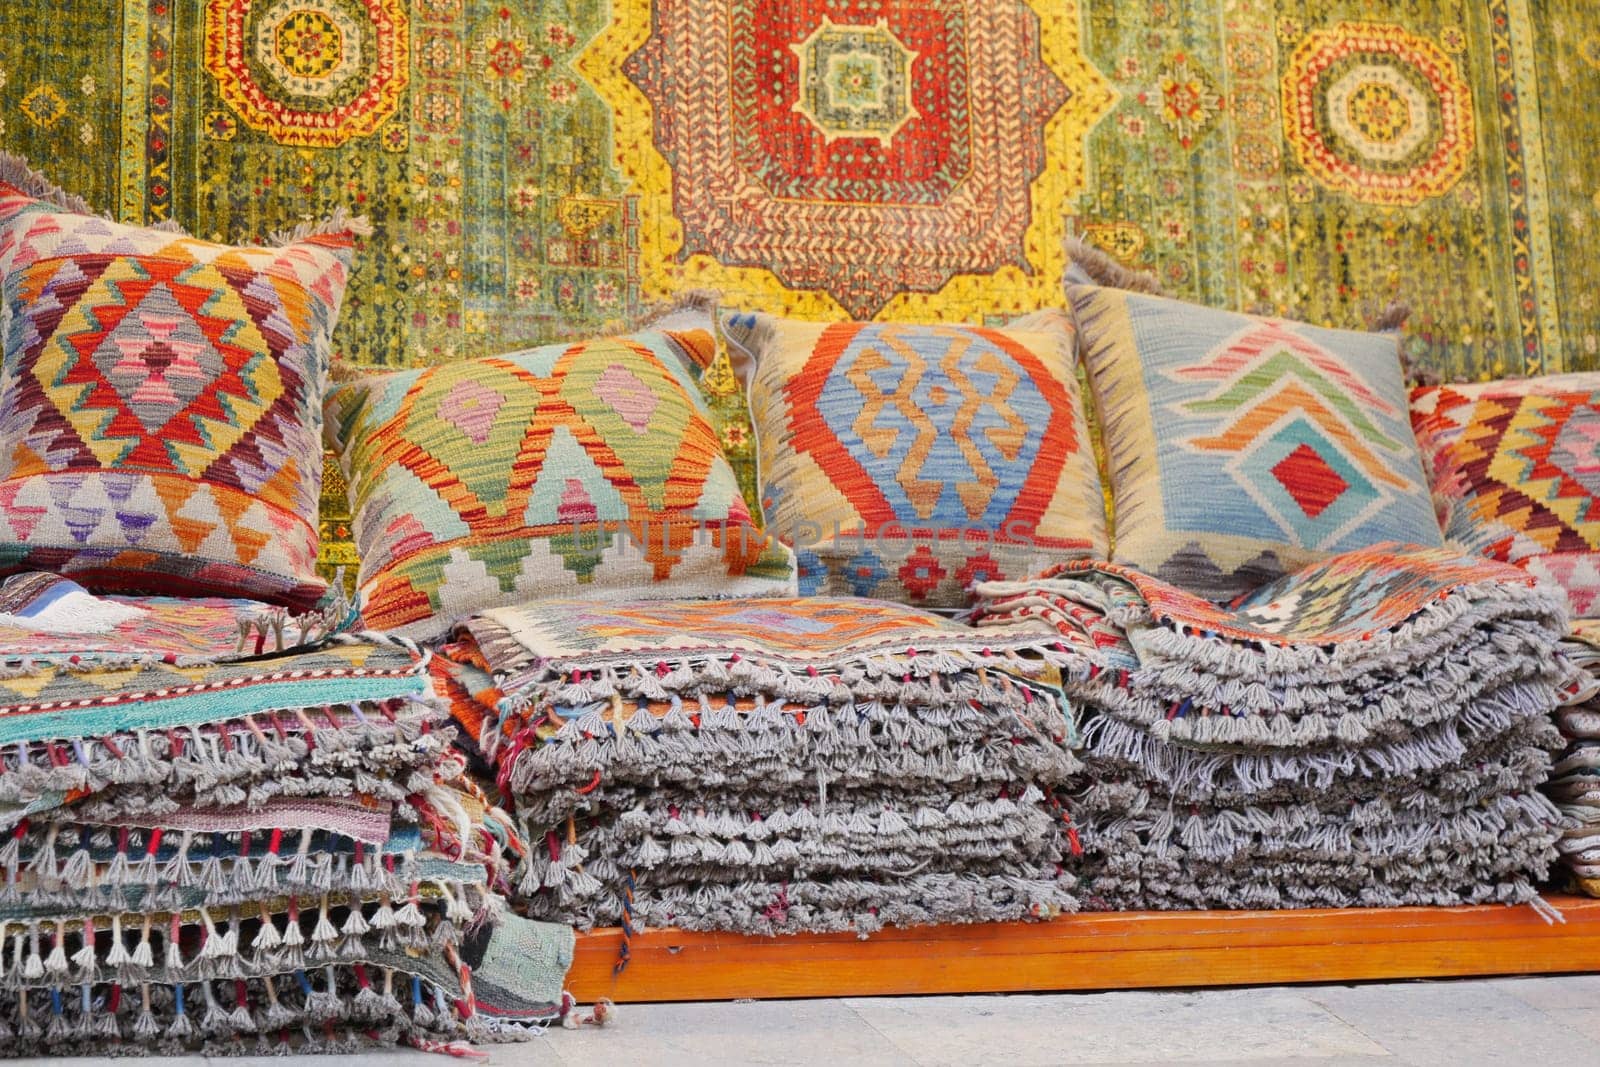 Colourful cushions and carpet on display for sale in a traditional Turkish Bazaar. by towfiq007